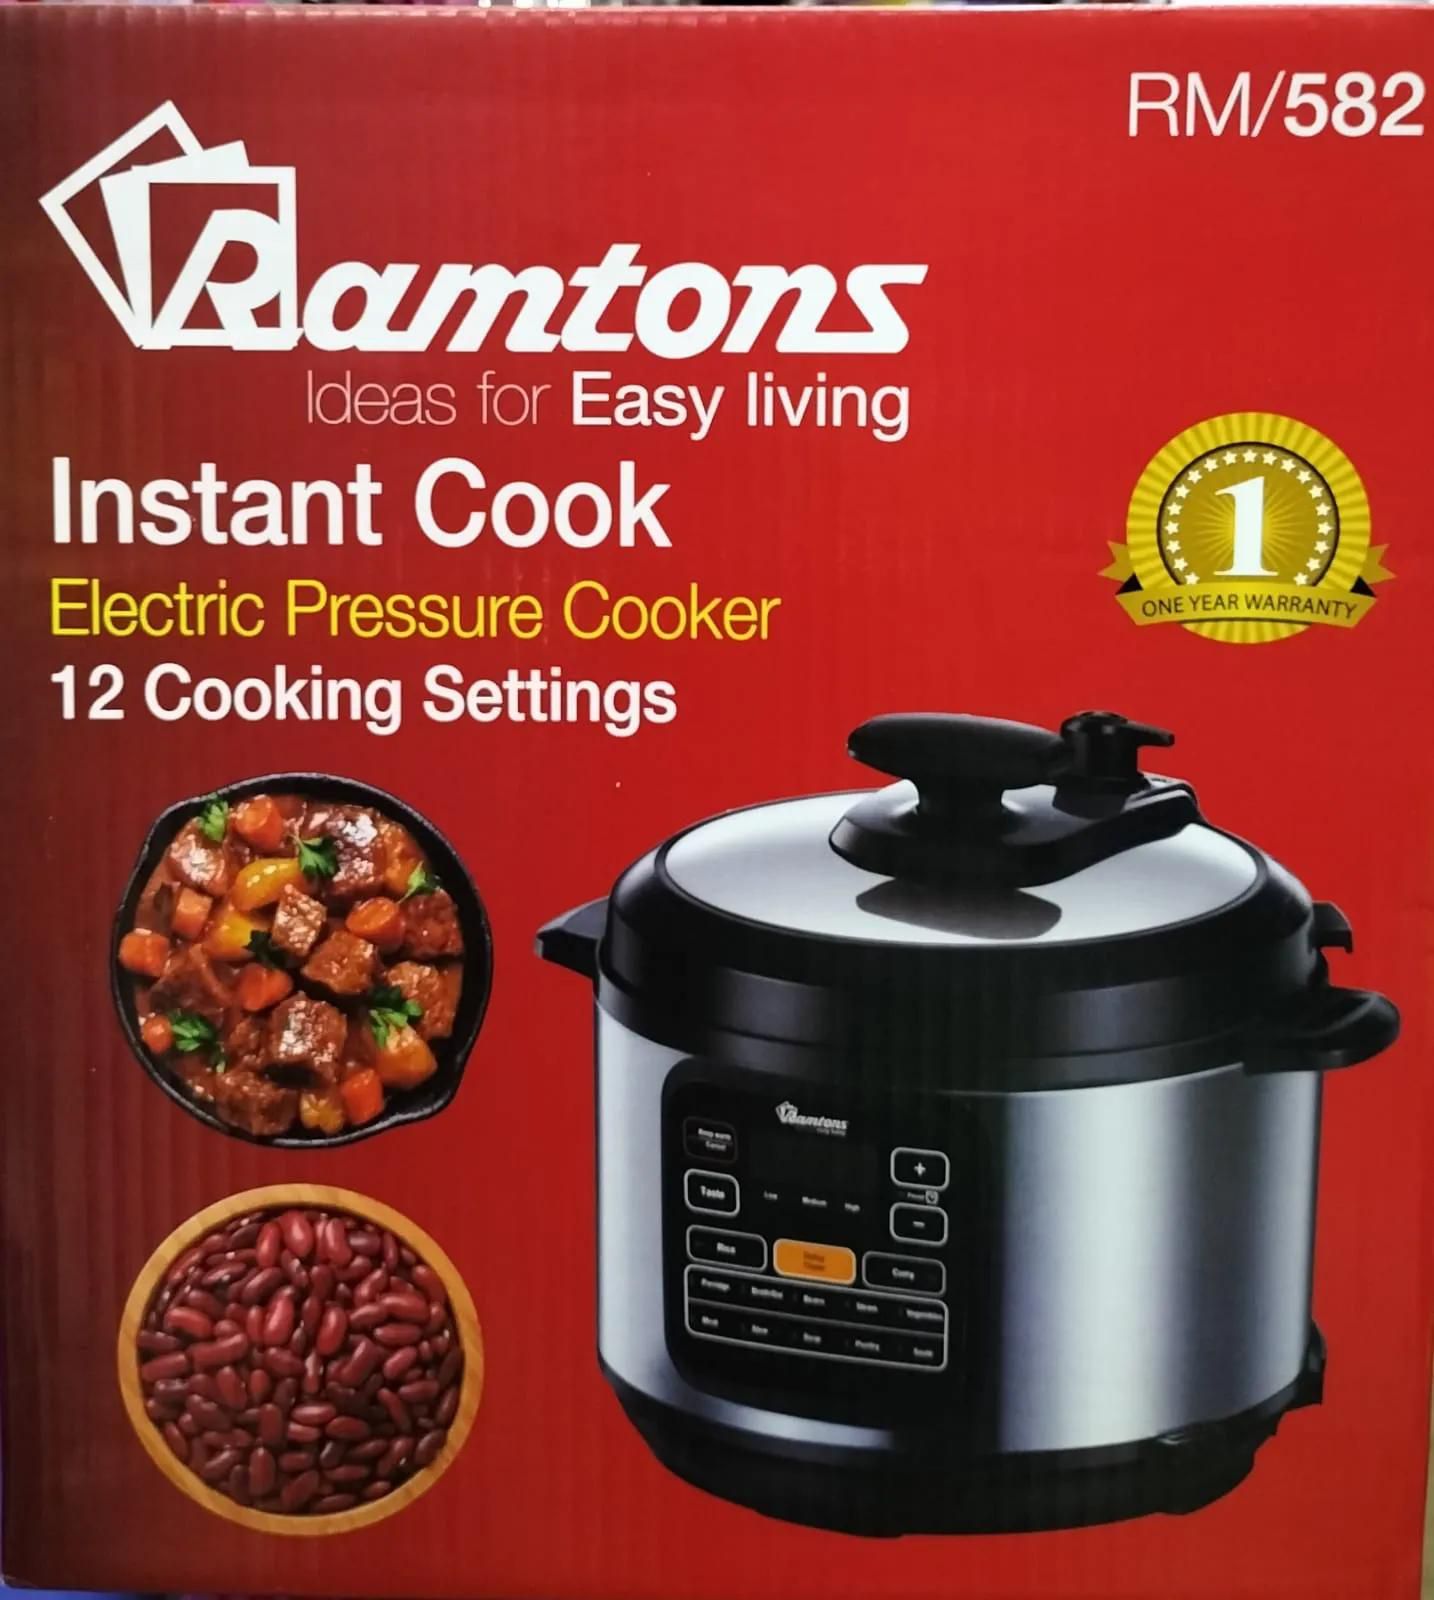 RM582; 6ltrs Ramtons electric pressure cooker with 12 cooking settings